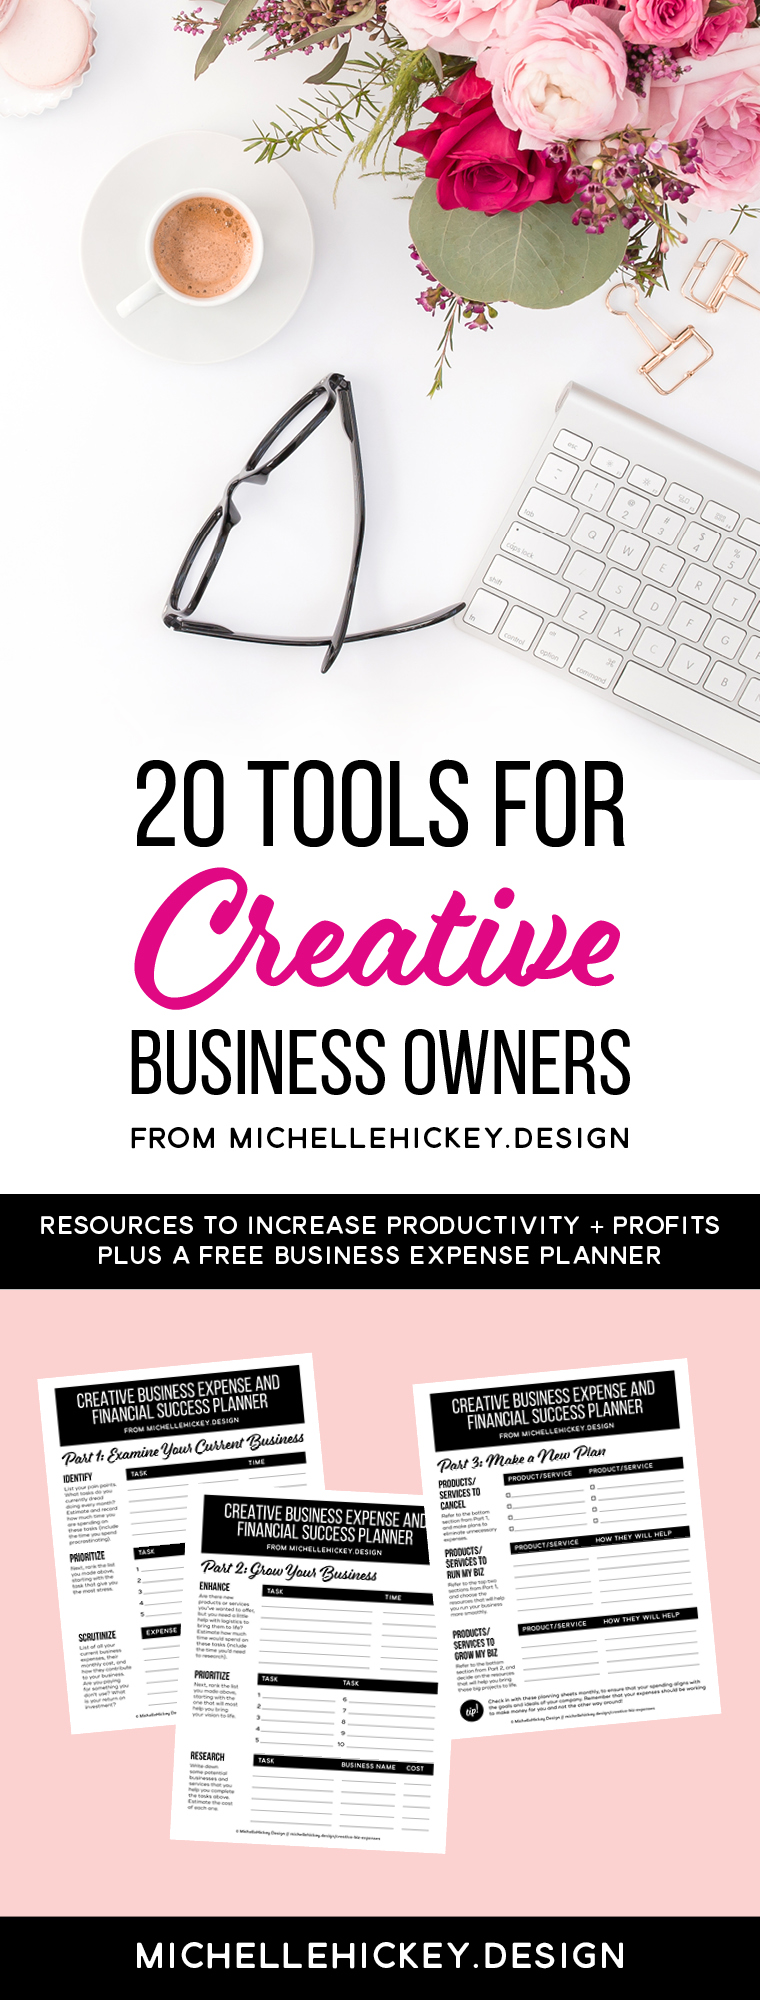 20 tools for creative business owners, running an online business. This list of helpful resources will help increase productivity + profits, while freeing up time so you can focus on the big picture. Includes a 3-page business expense and financial success planner so you can start making actionable changes right away. 